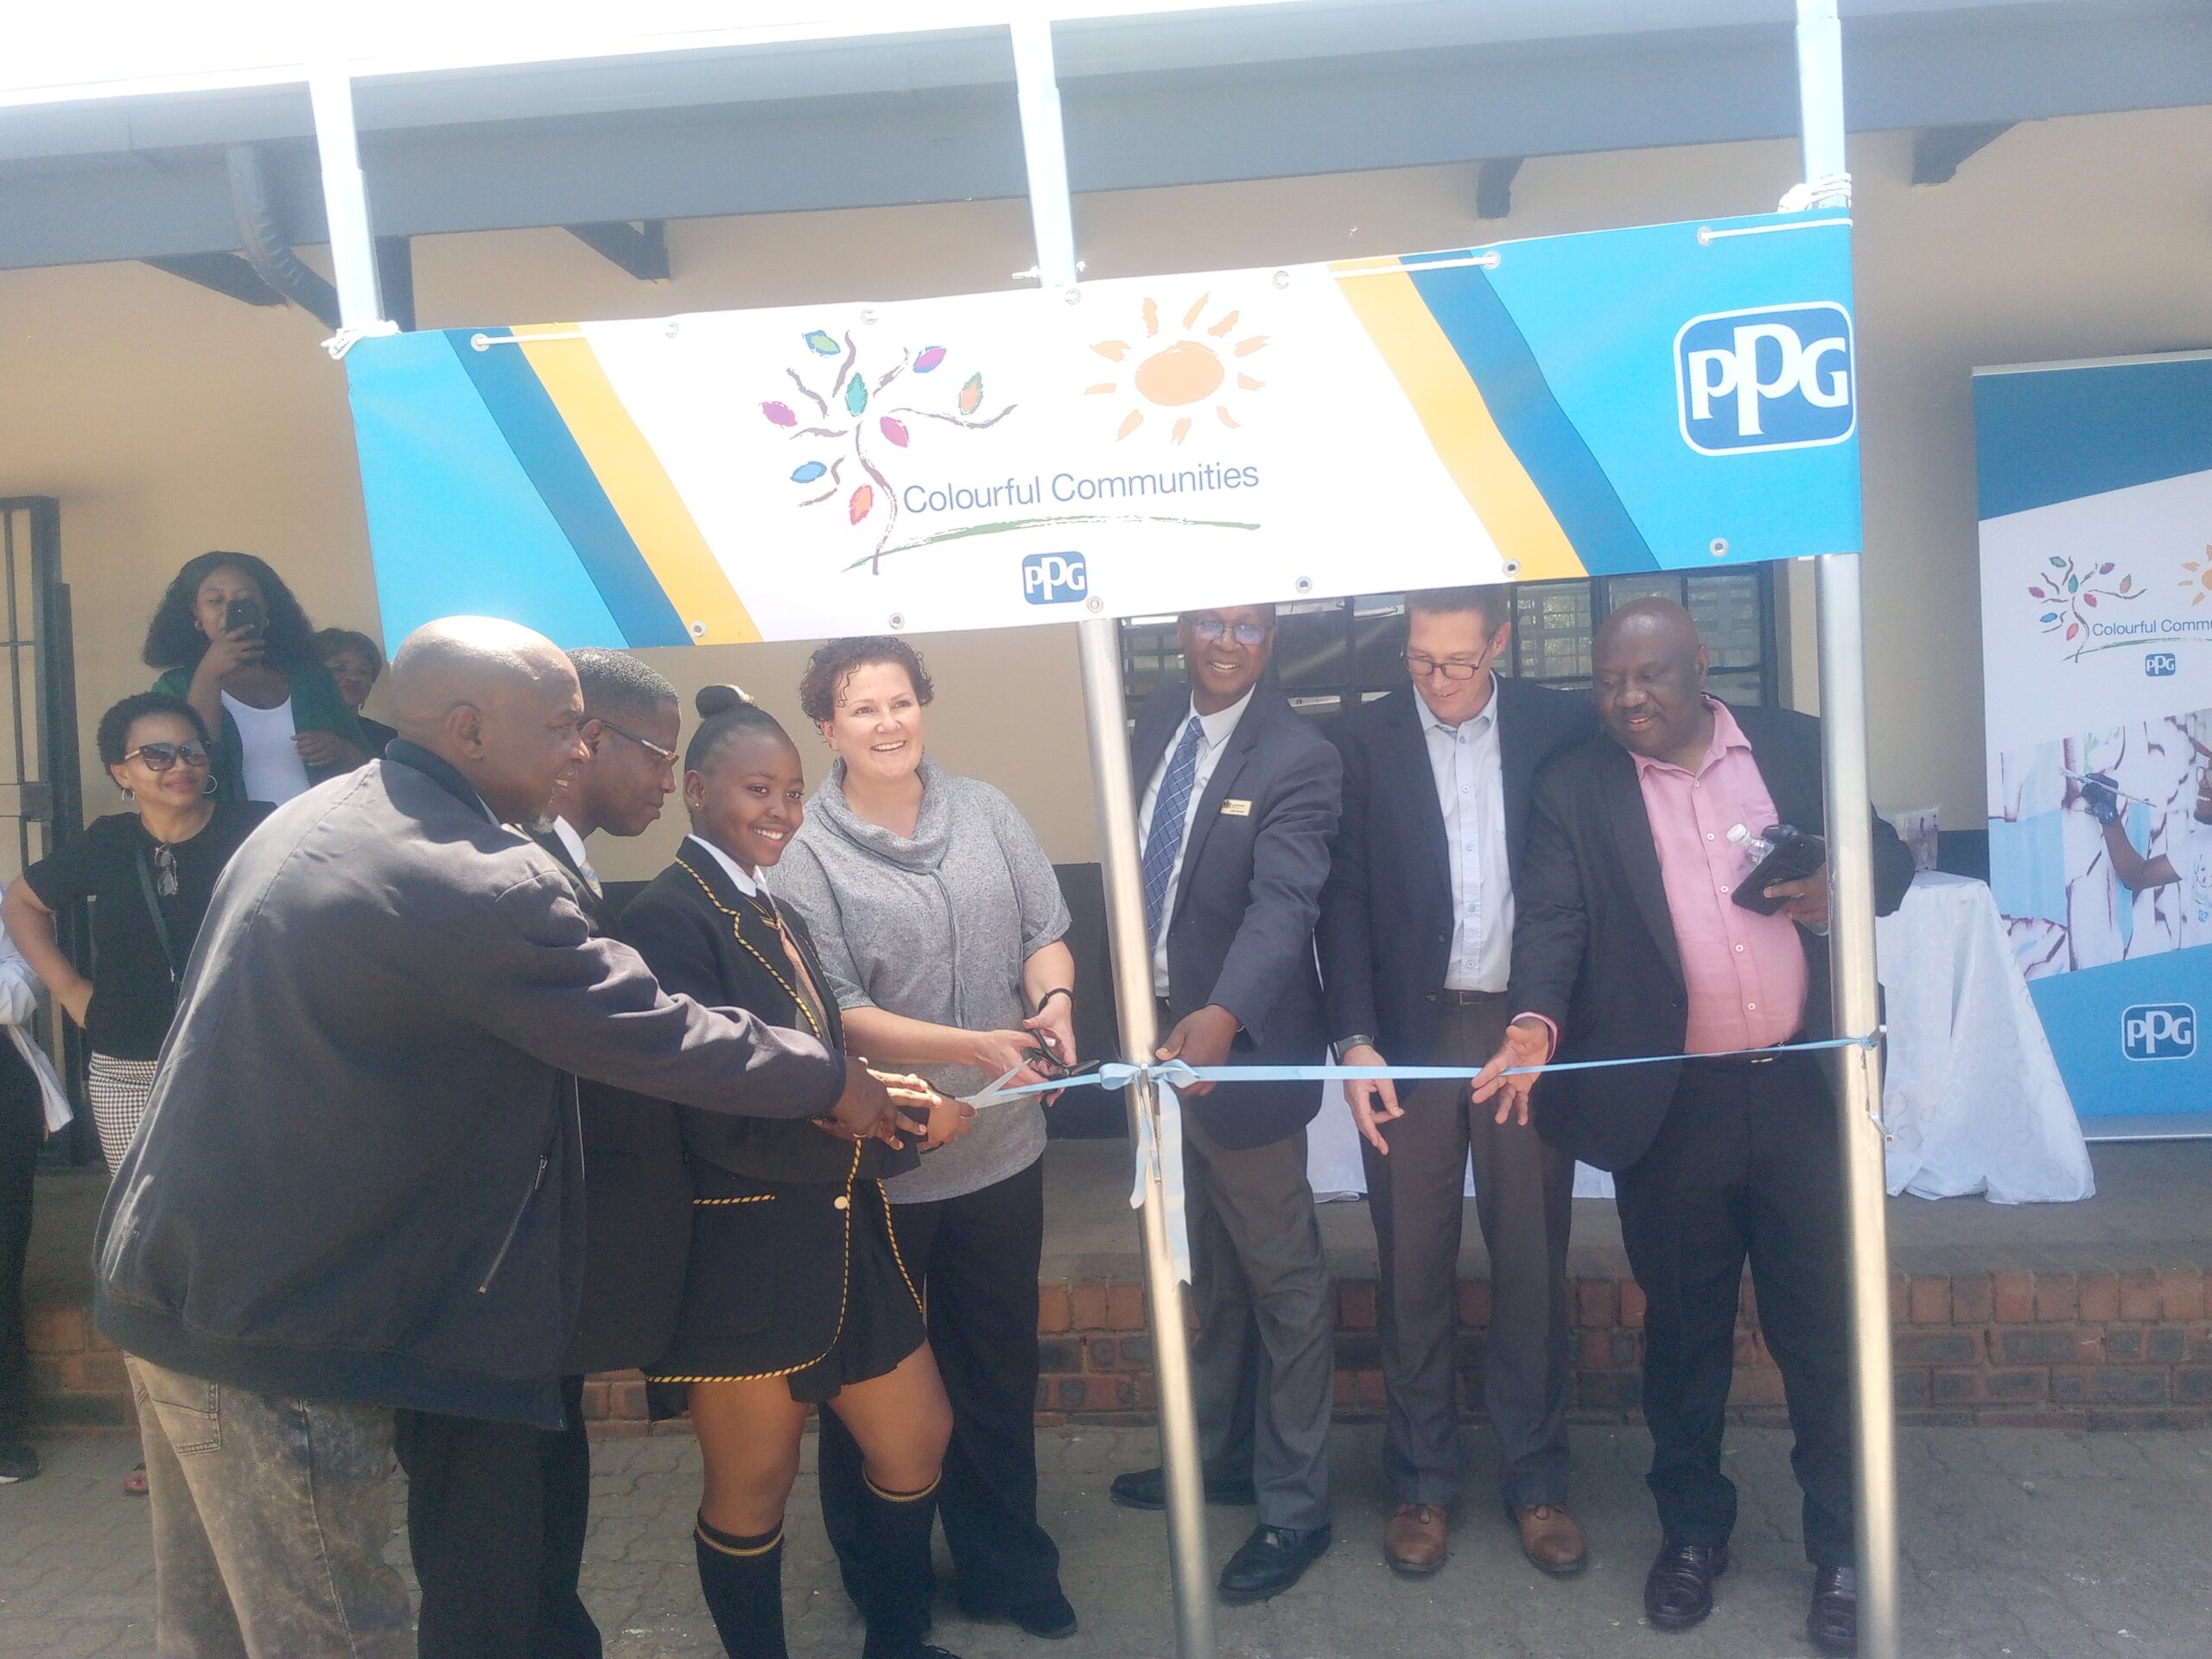 PPG’s officials, principal, official from department of education cut ribbon during the complete project of New Paint for a New Start Initiative Transforms Mamelodi Secondary School with Vibrant R1.5m Makeover